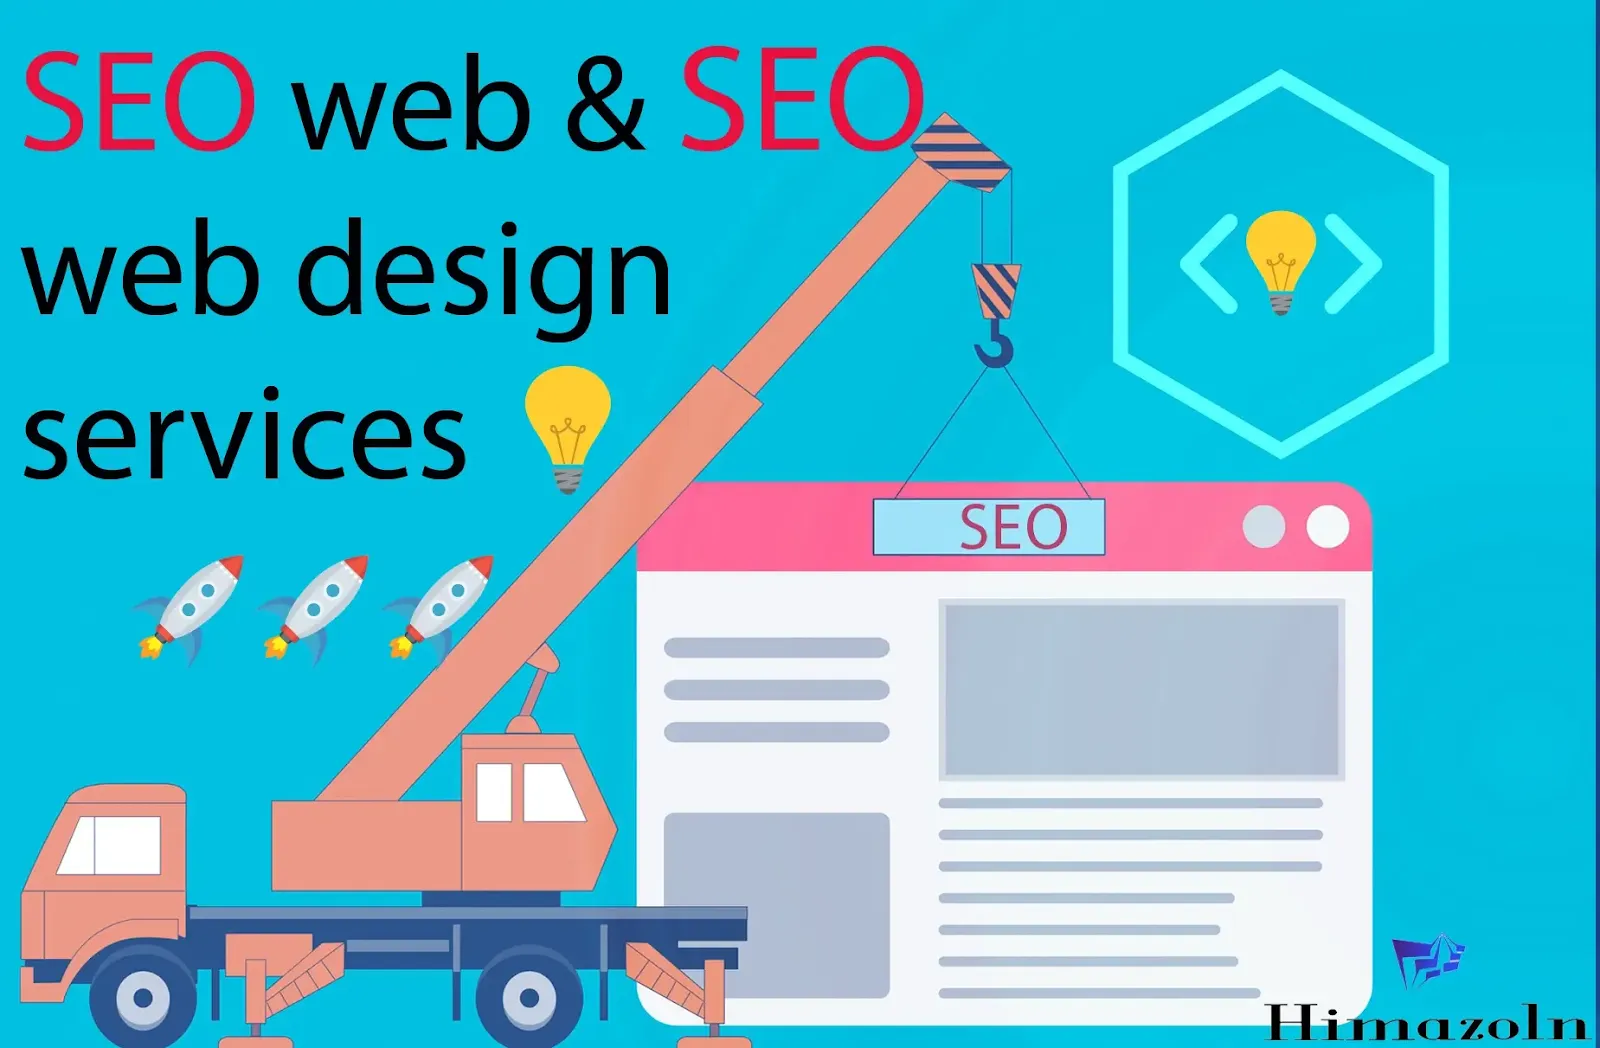 You must know what SEO web & SEO web design services